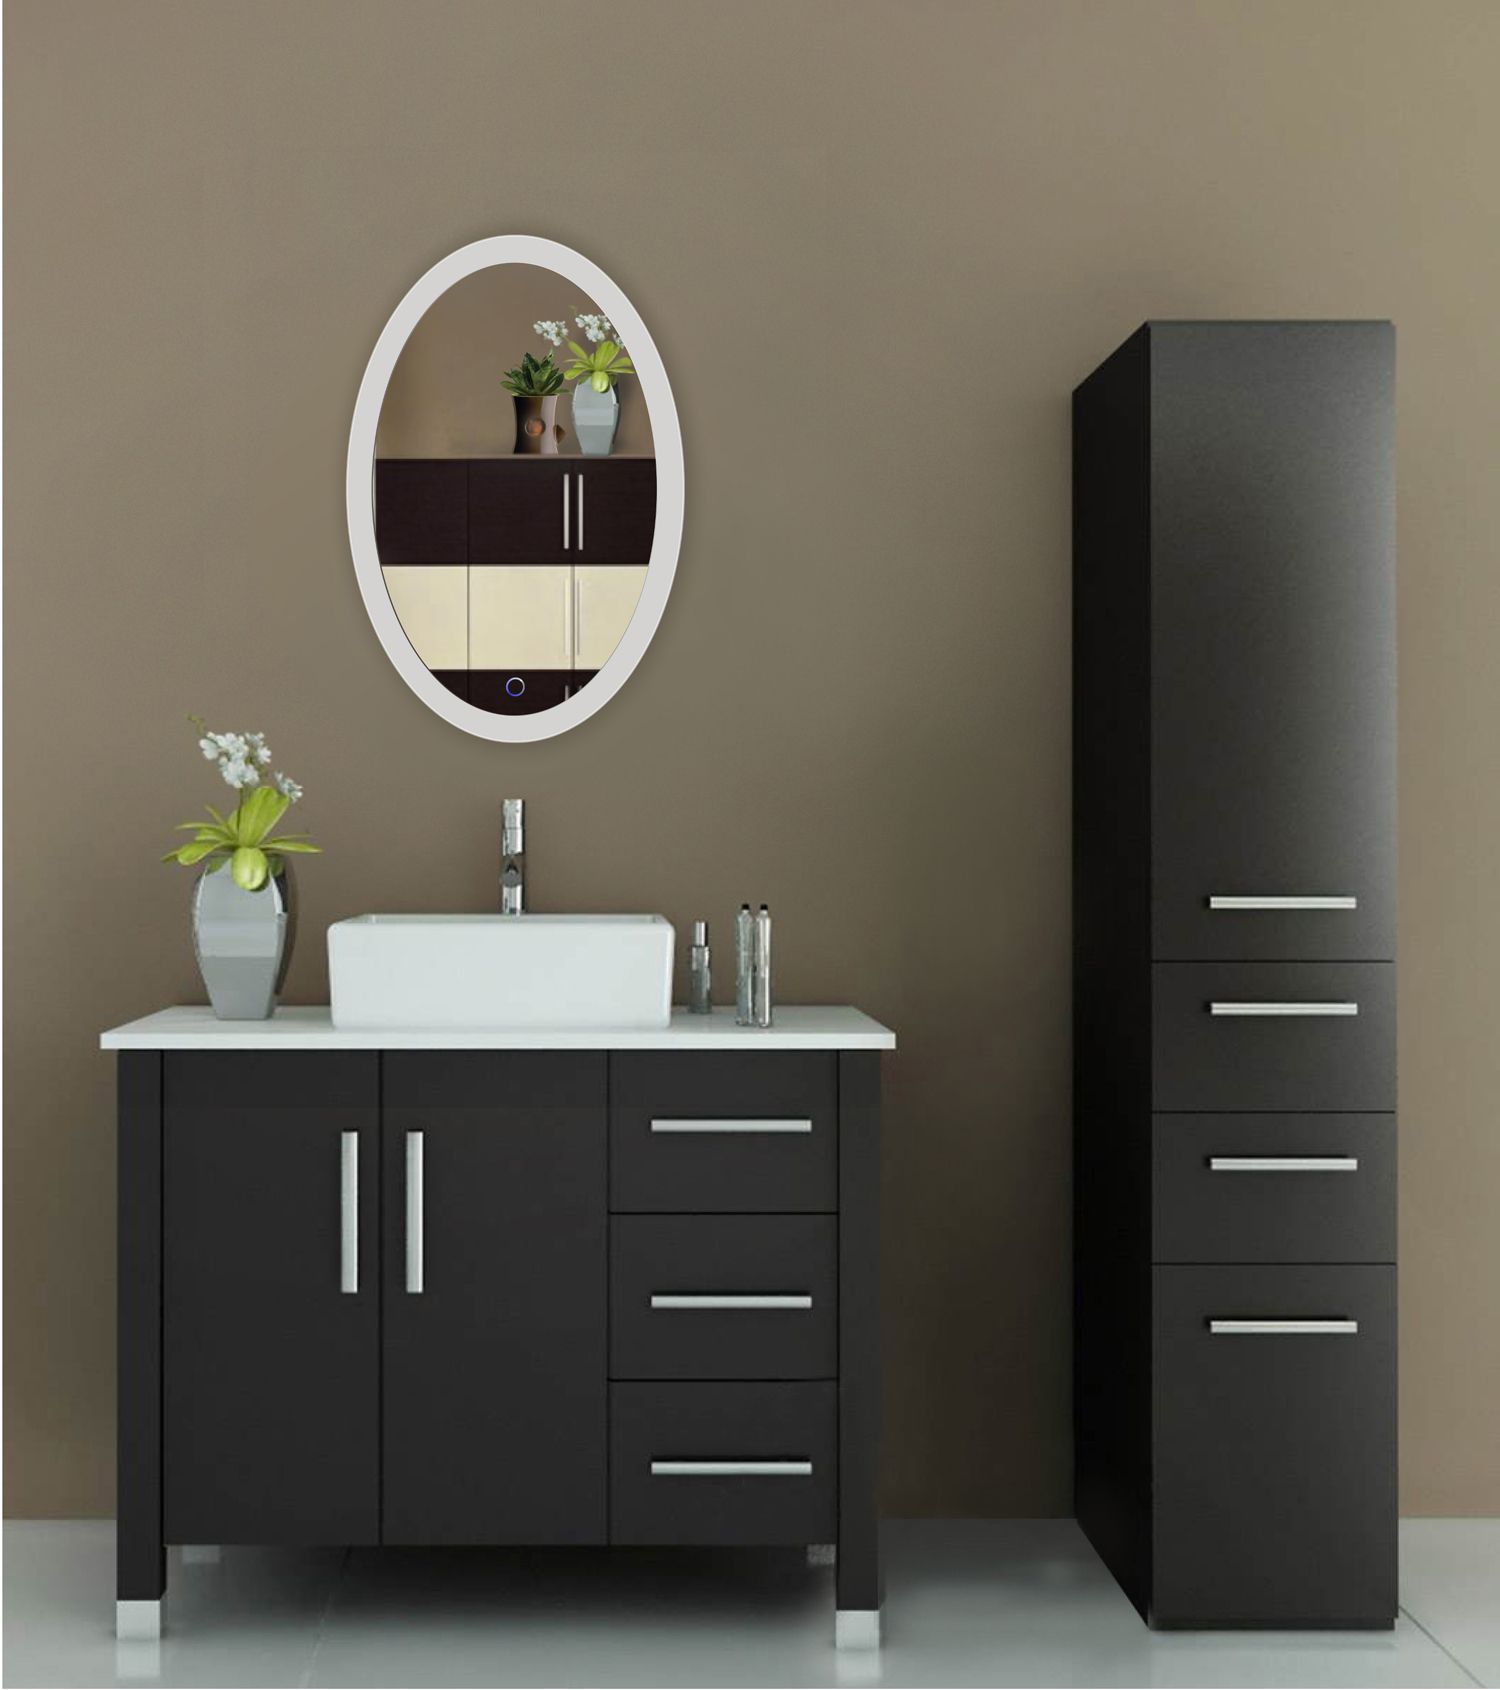 Sol Oval 20″ X 30″ Led Bathroom Mirror W/ Dimmer & Defogger | Oval Back In Back Lit Oval Led Wall Mirrors (Photo 9 of 15)